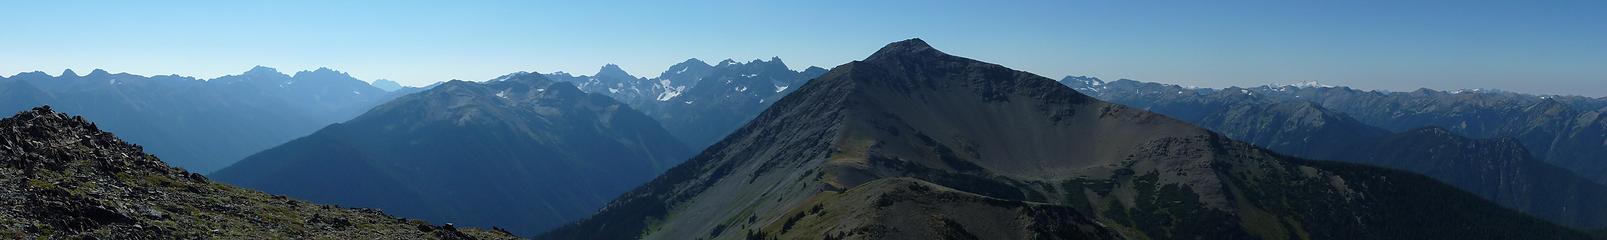 Pano from Baldy, Grey Wolf in foreground